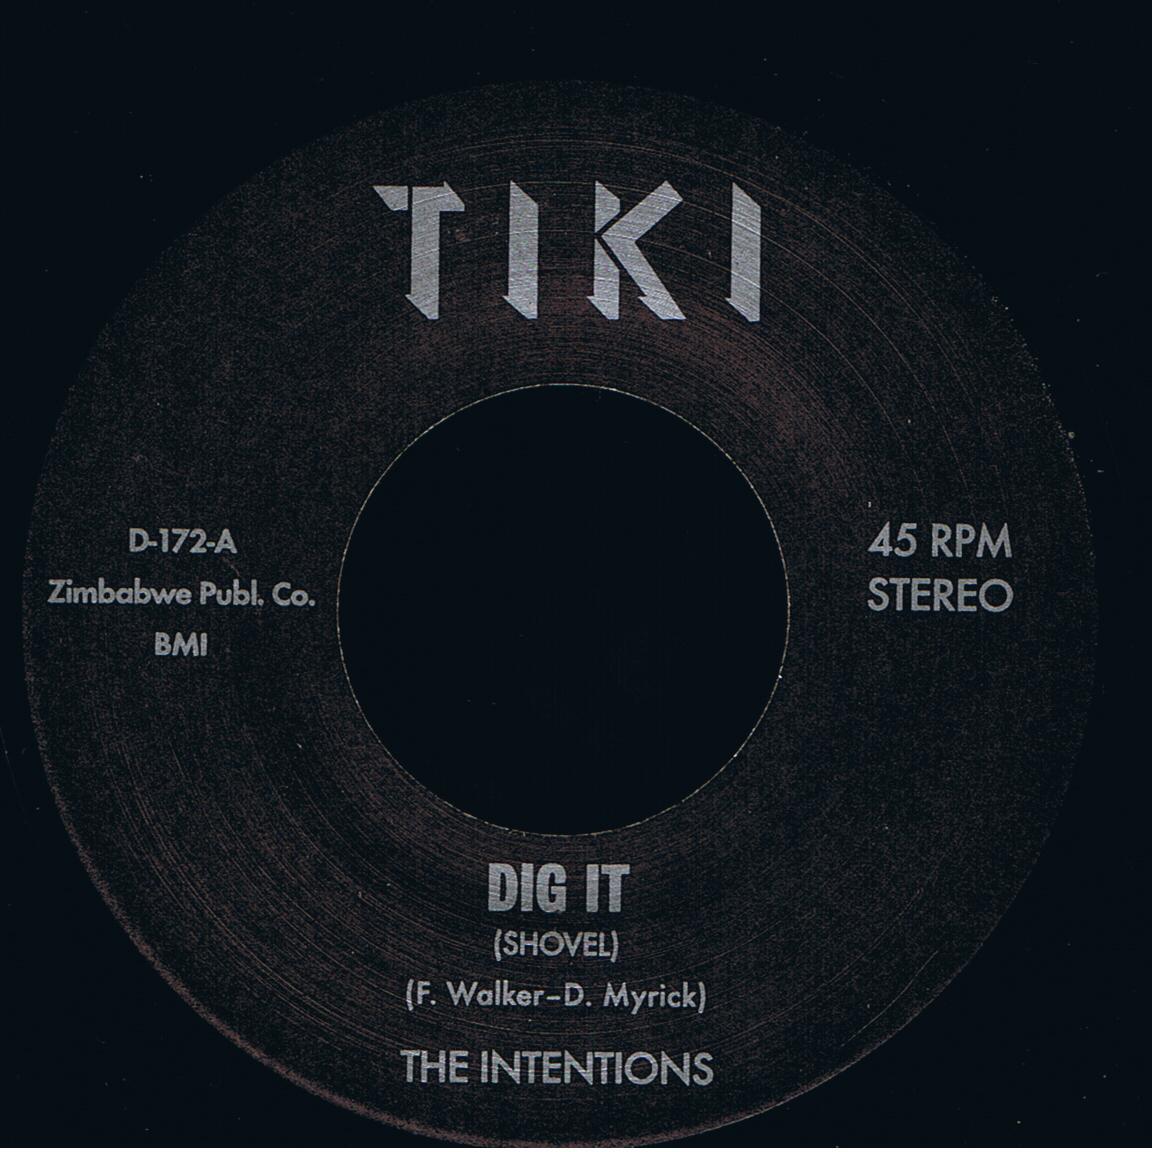 The Intensions - Dig It / Blowing With The Wind (7")